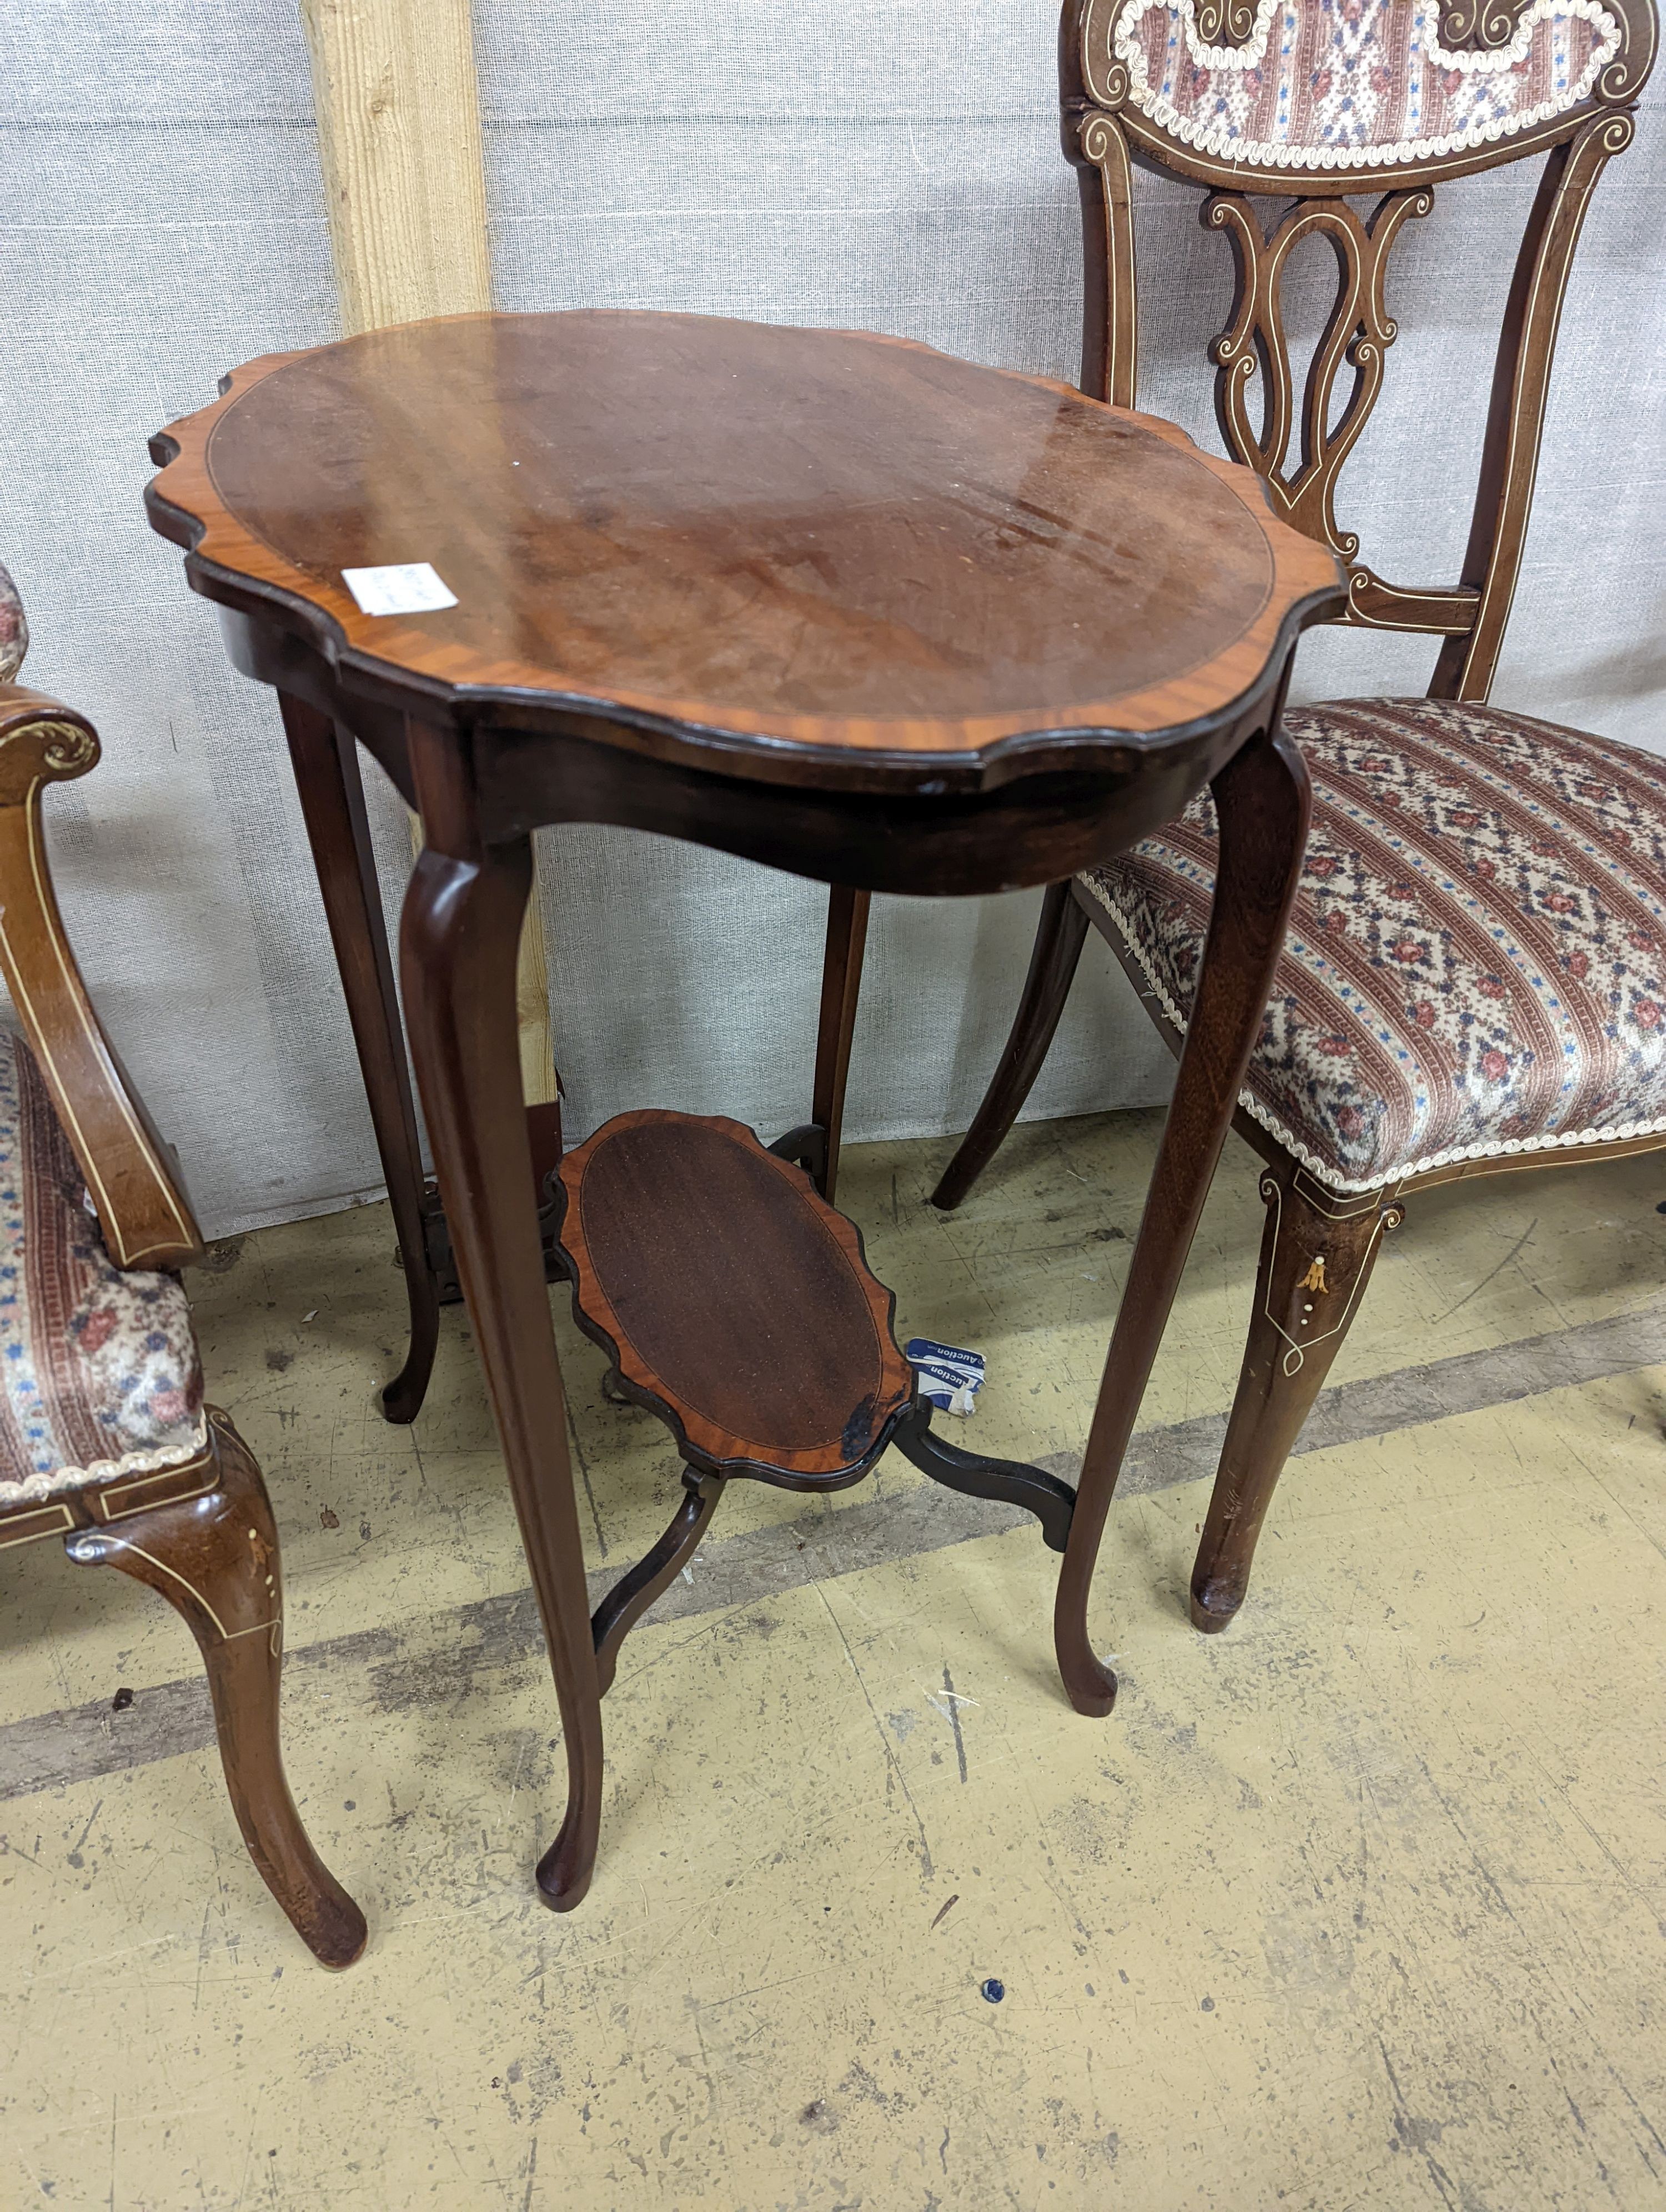 Three late Victorian bone inlaid mahogany chairs, two with arms, together with an Edwardian oval satinwood banded occasional table.